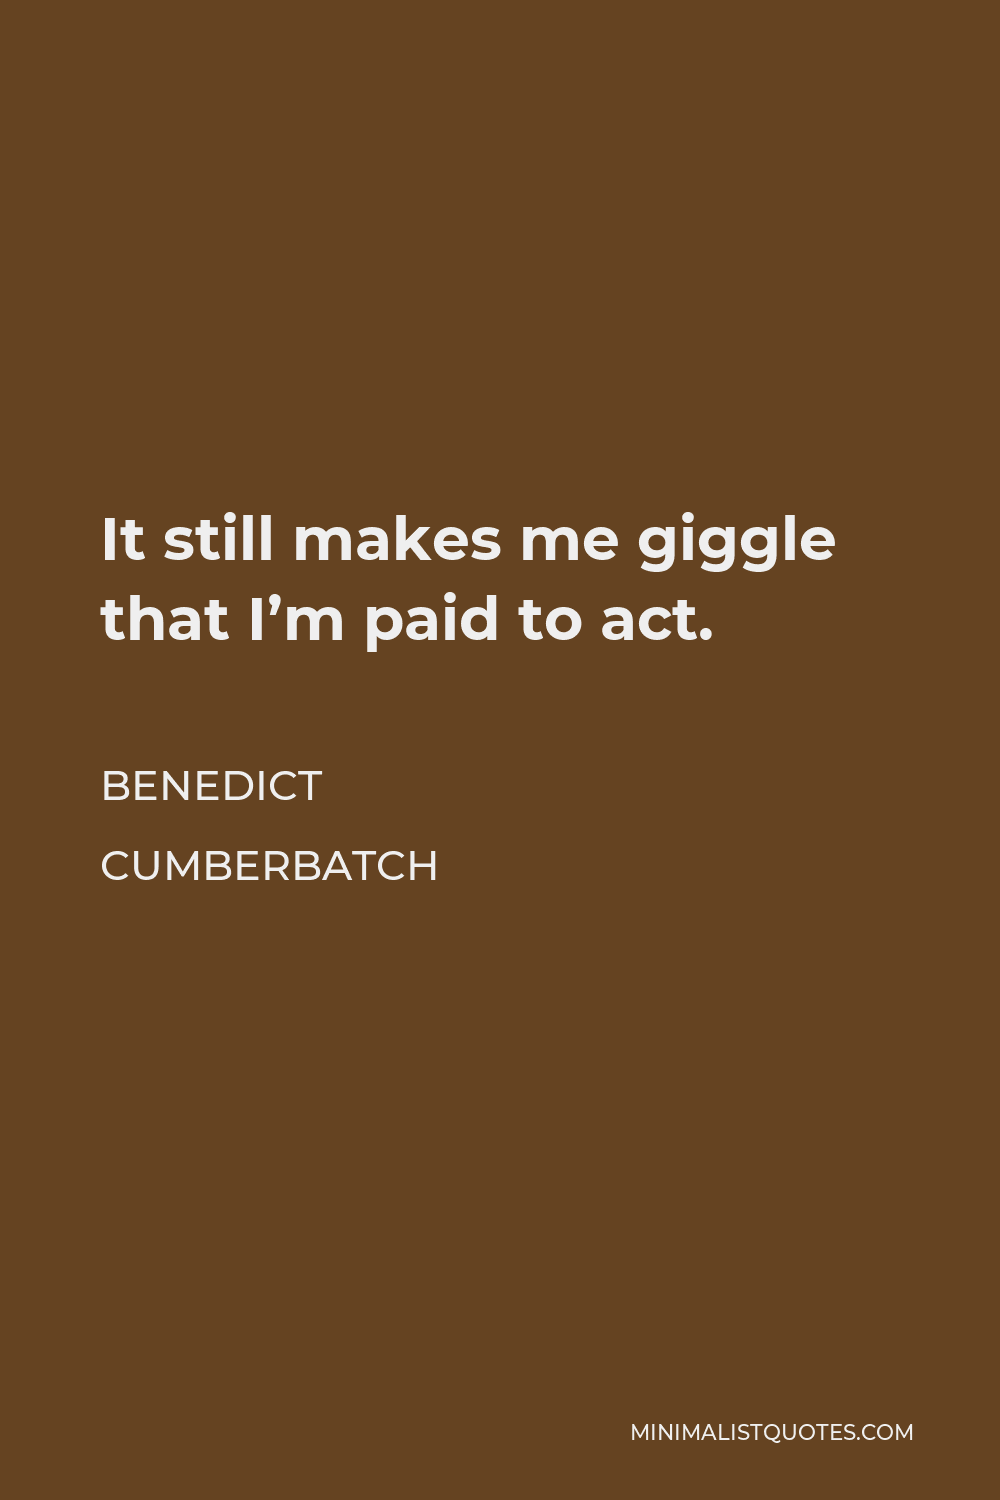 Benedict Cumberbatch Quote - It still makes me giggle that I’m paid to act.